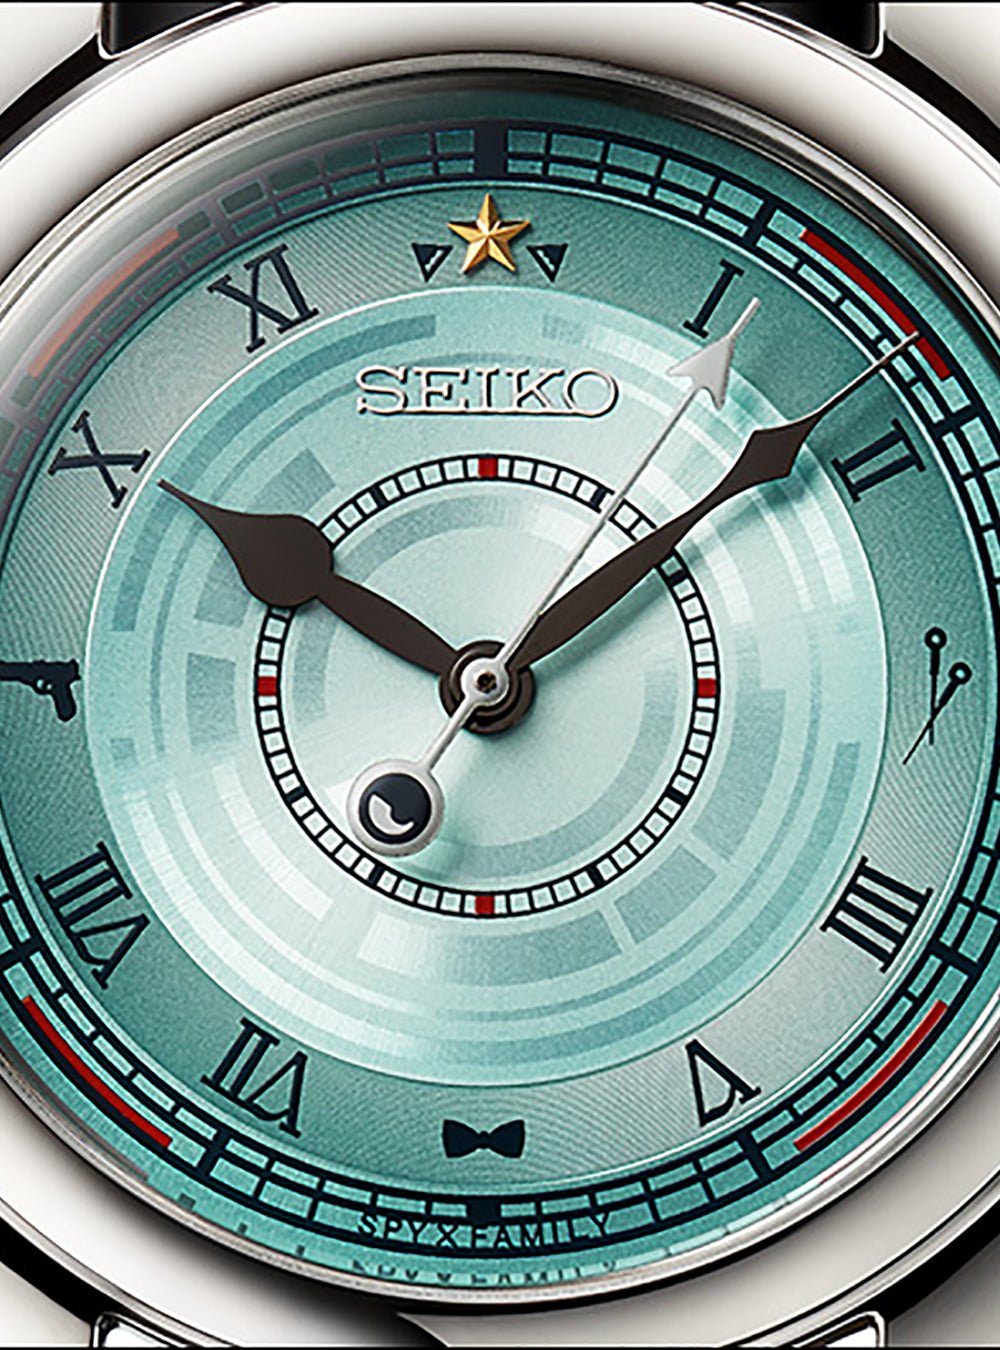 SEIKO×SPY×FAMILY LIMITED EDITION MADE IN JAPANWRISTWATCHjapan-select